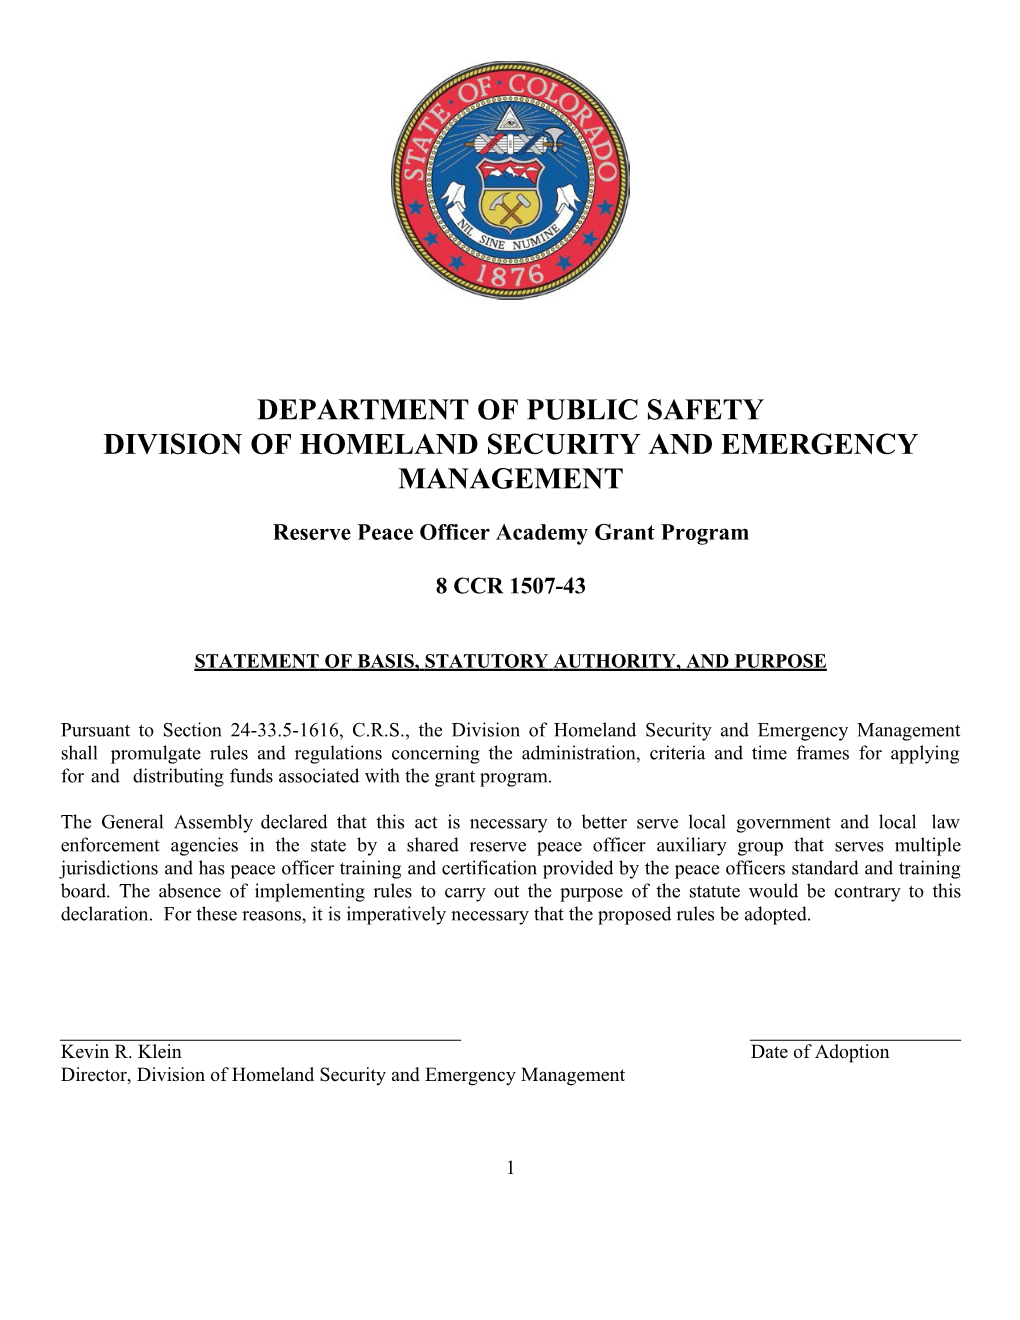 Division Ofhomelandsecurity and Emergencymanagement